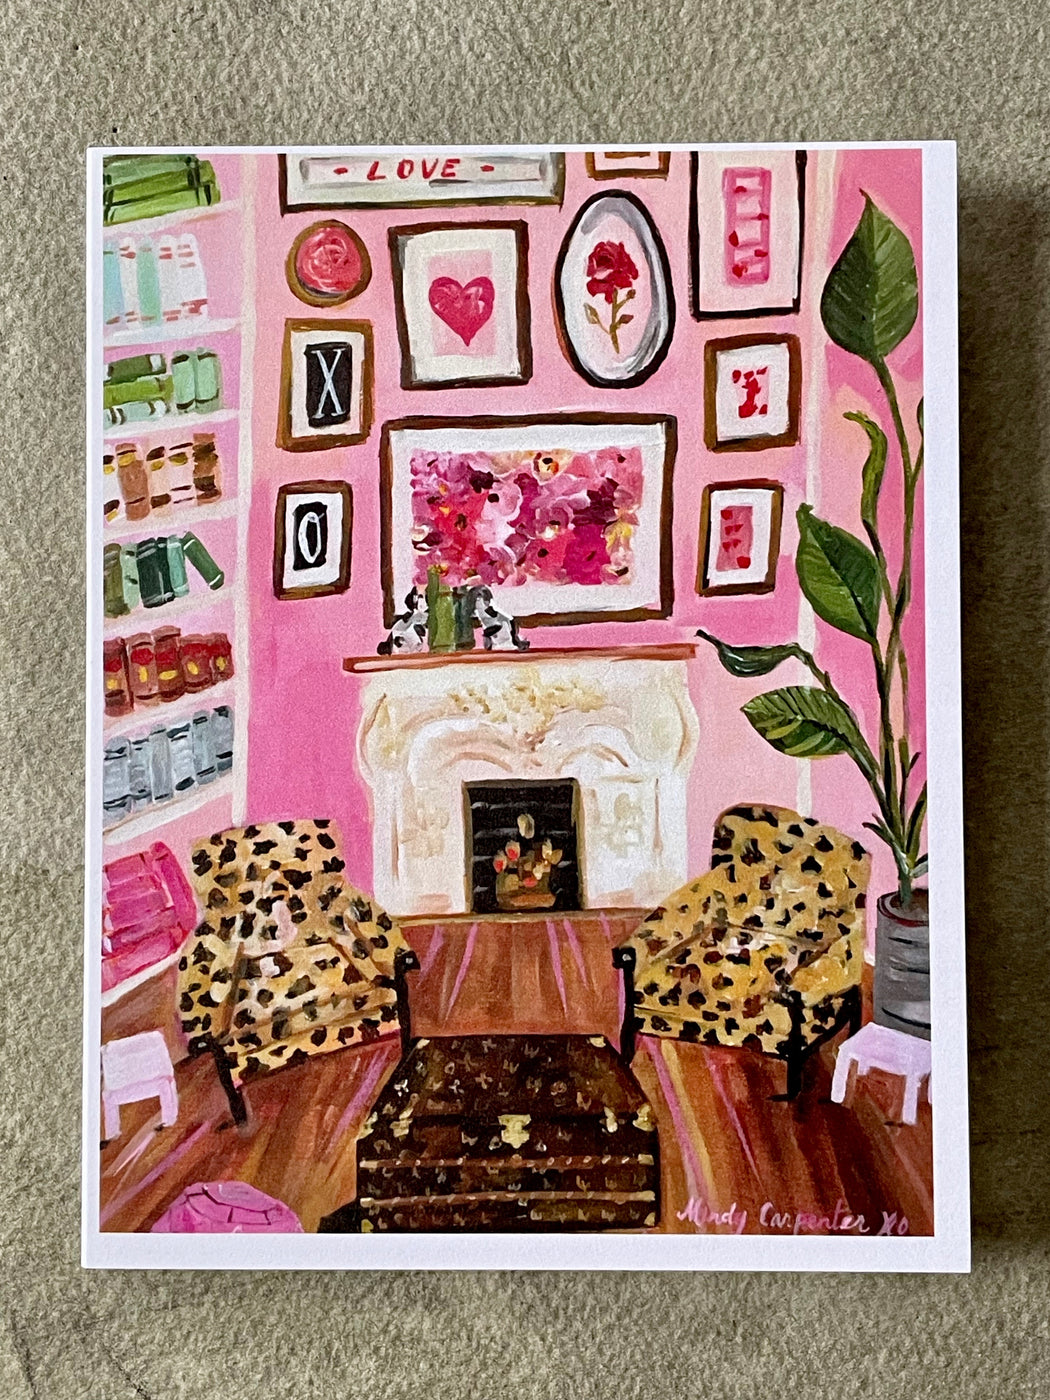 "Leopard and Louis" Card by Mindy Carpenter